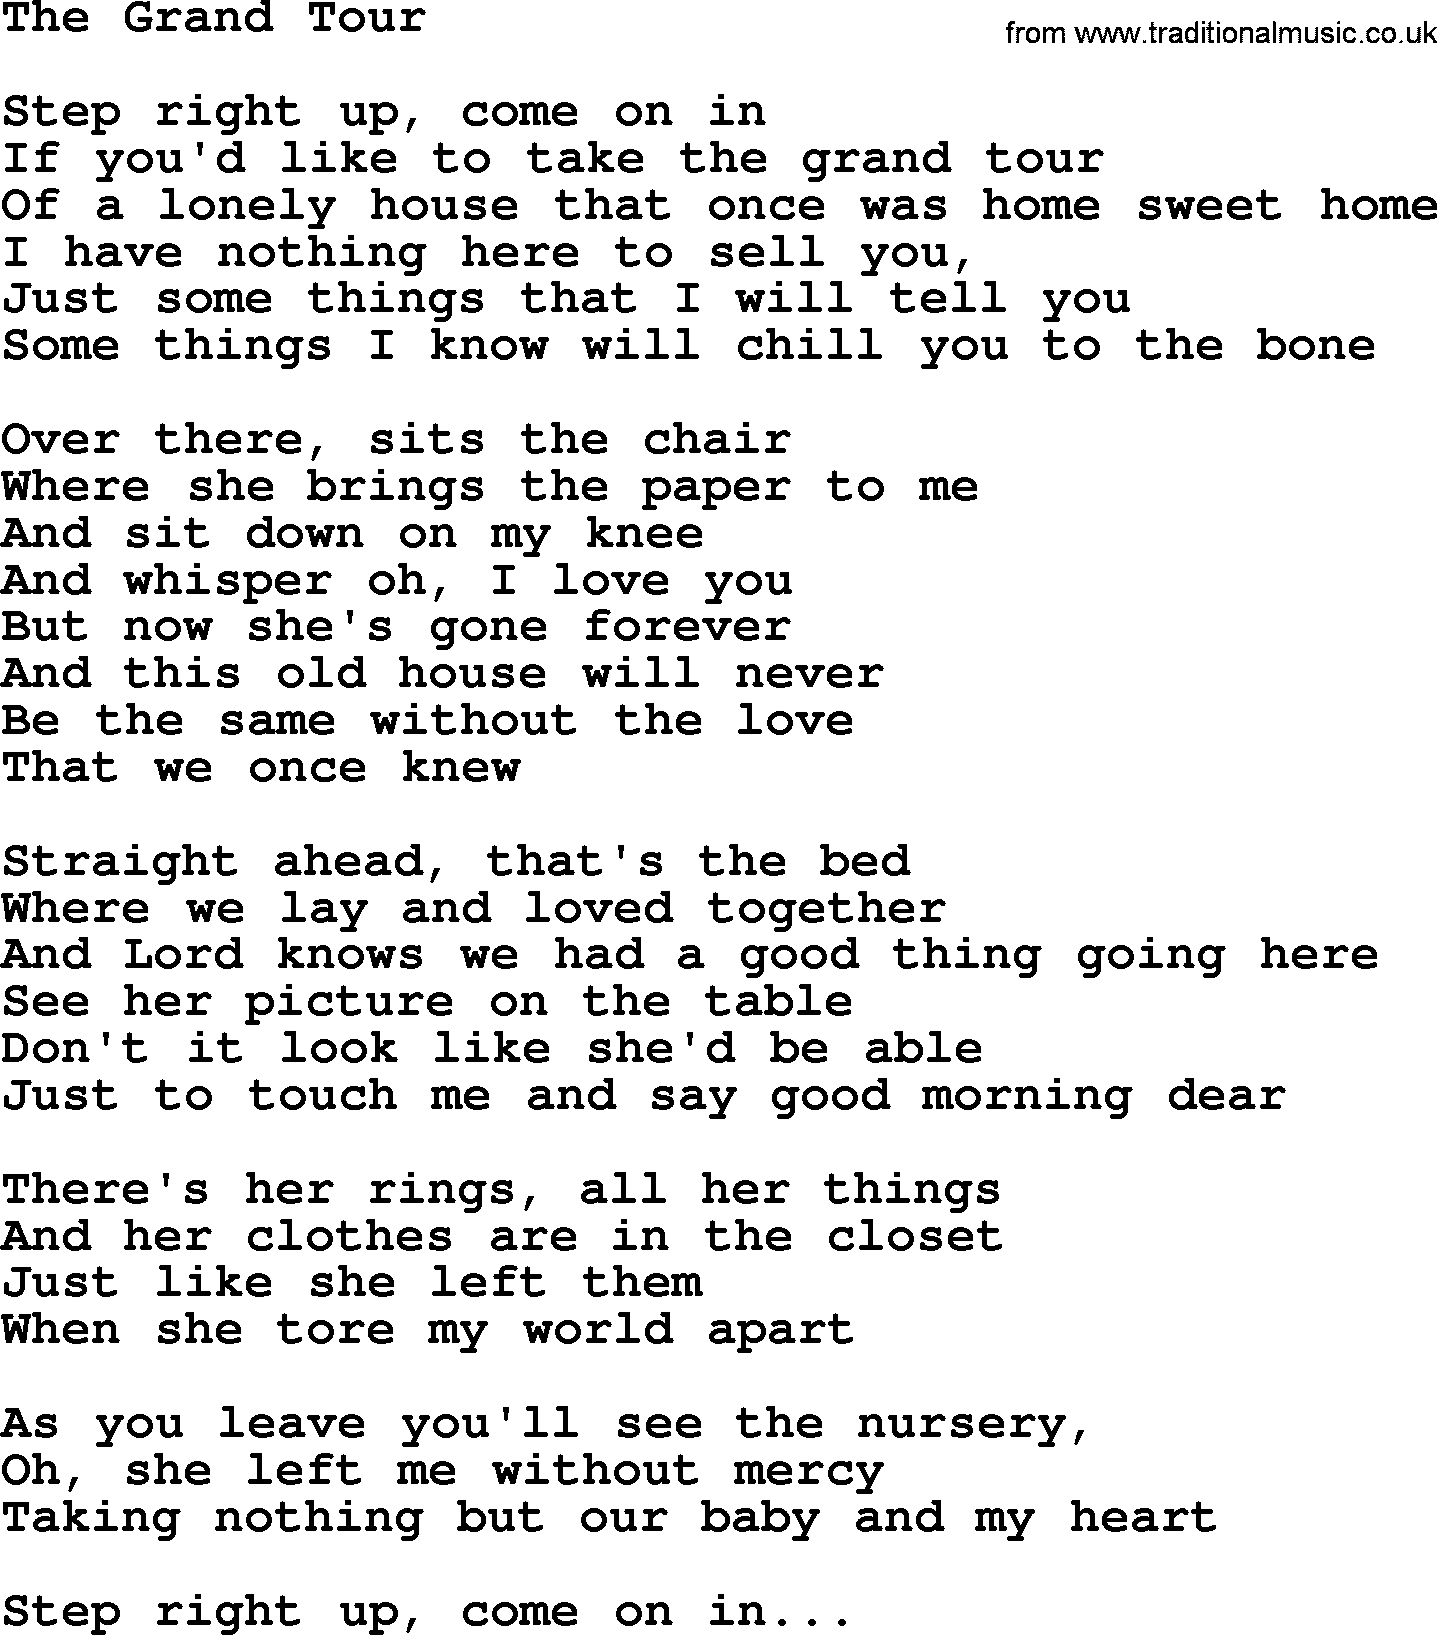 The Grand Tour by Jones Counrty song lyrics